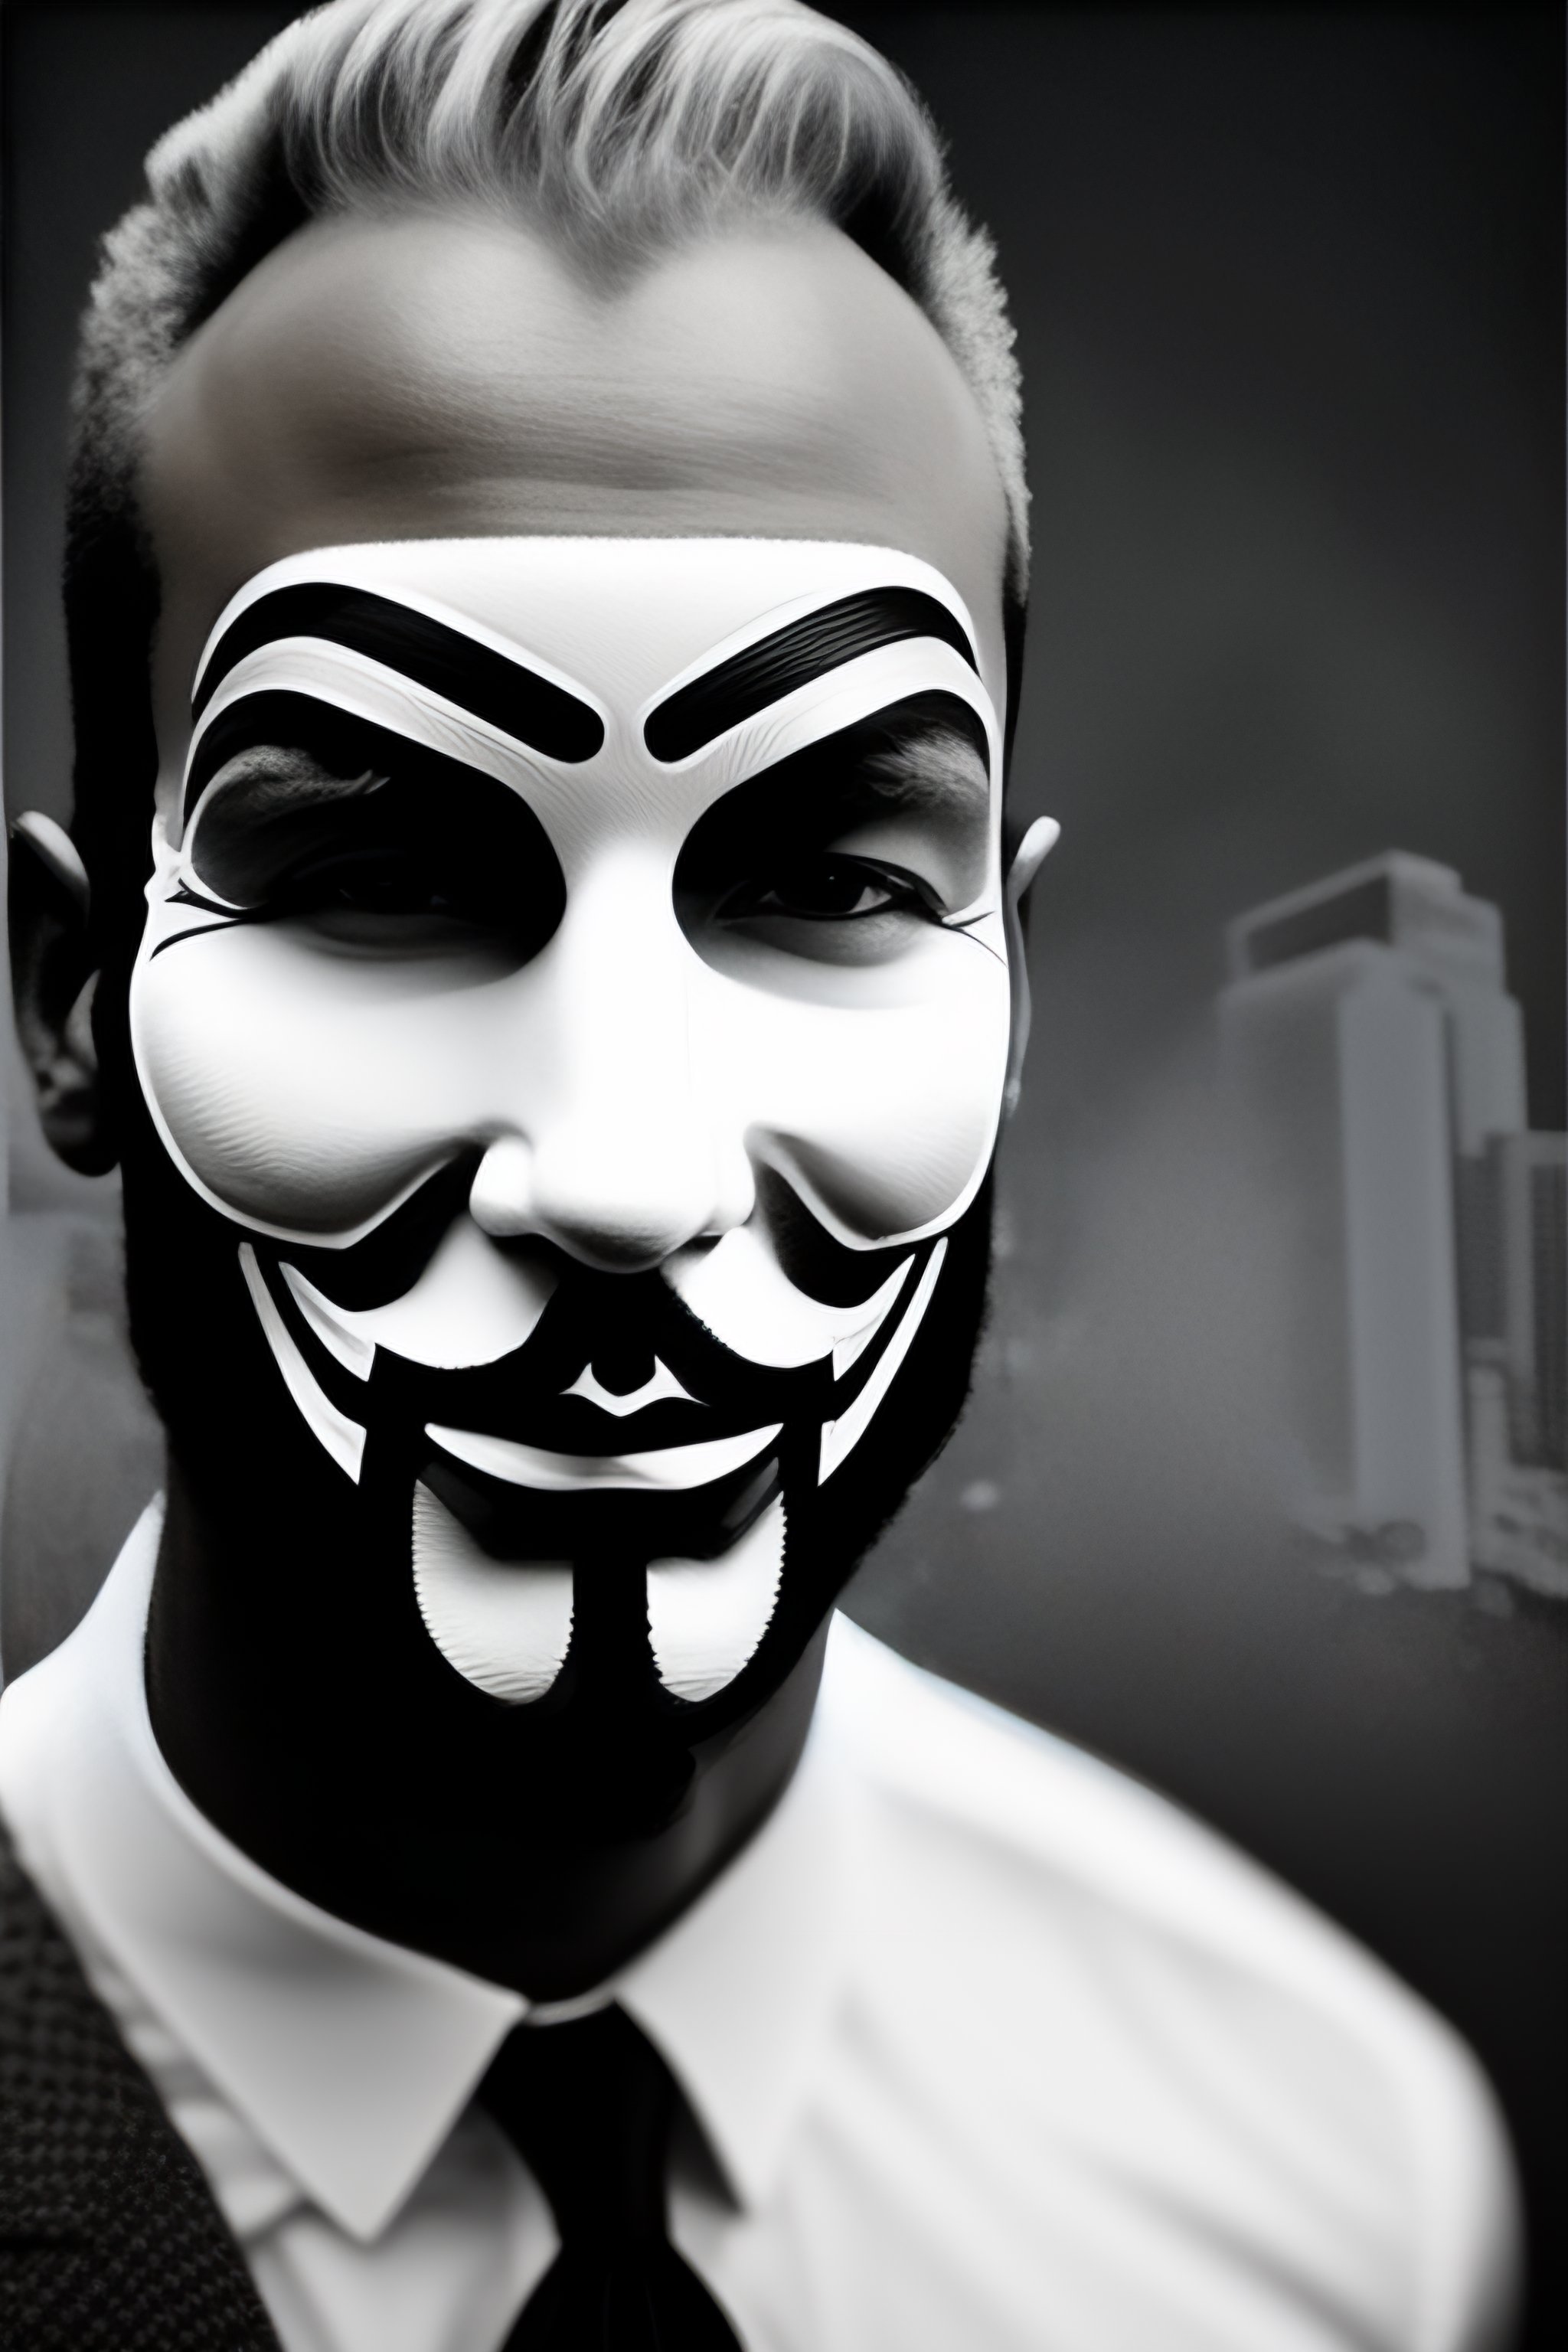 The Anonymous Mask. Monochrome Editorial Photography - Illustration of  anon, design: 185816032